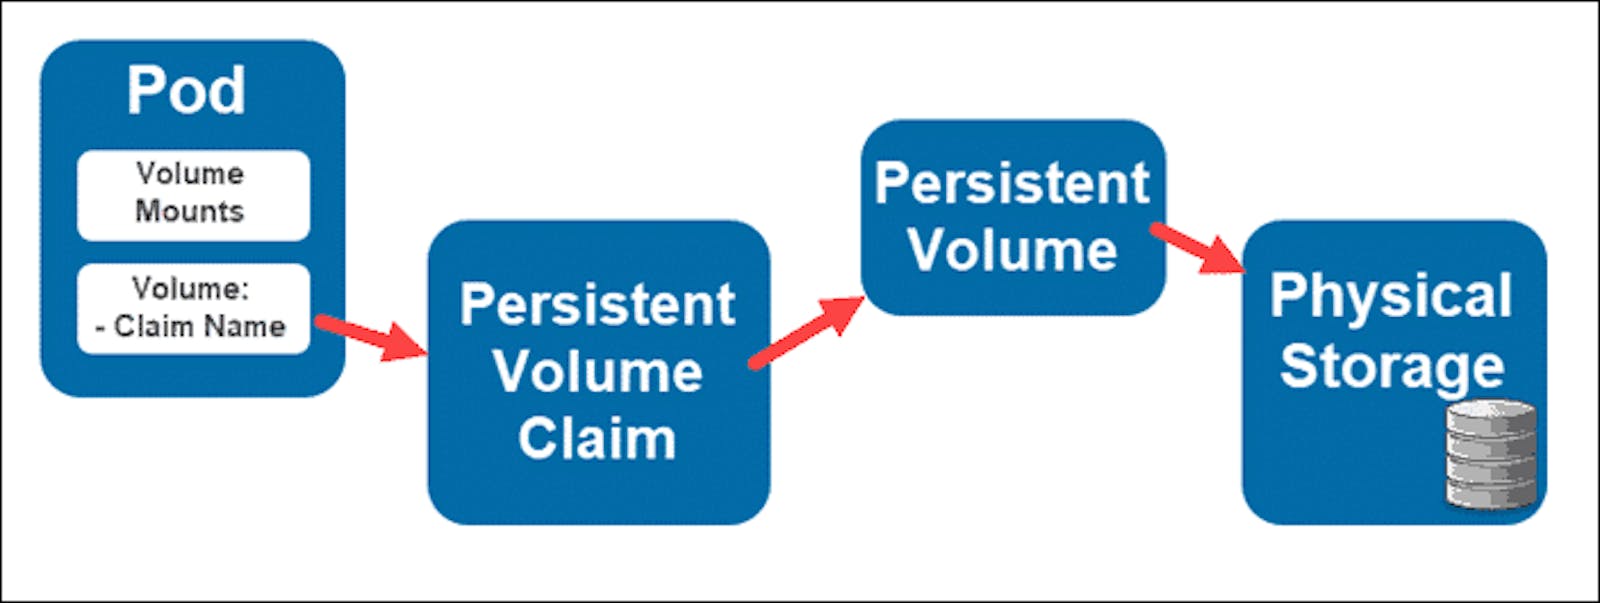 Day 36 - Persistent Volumes